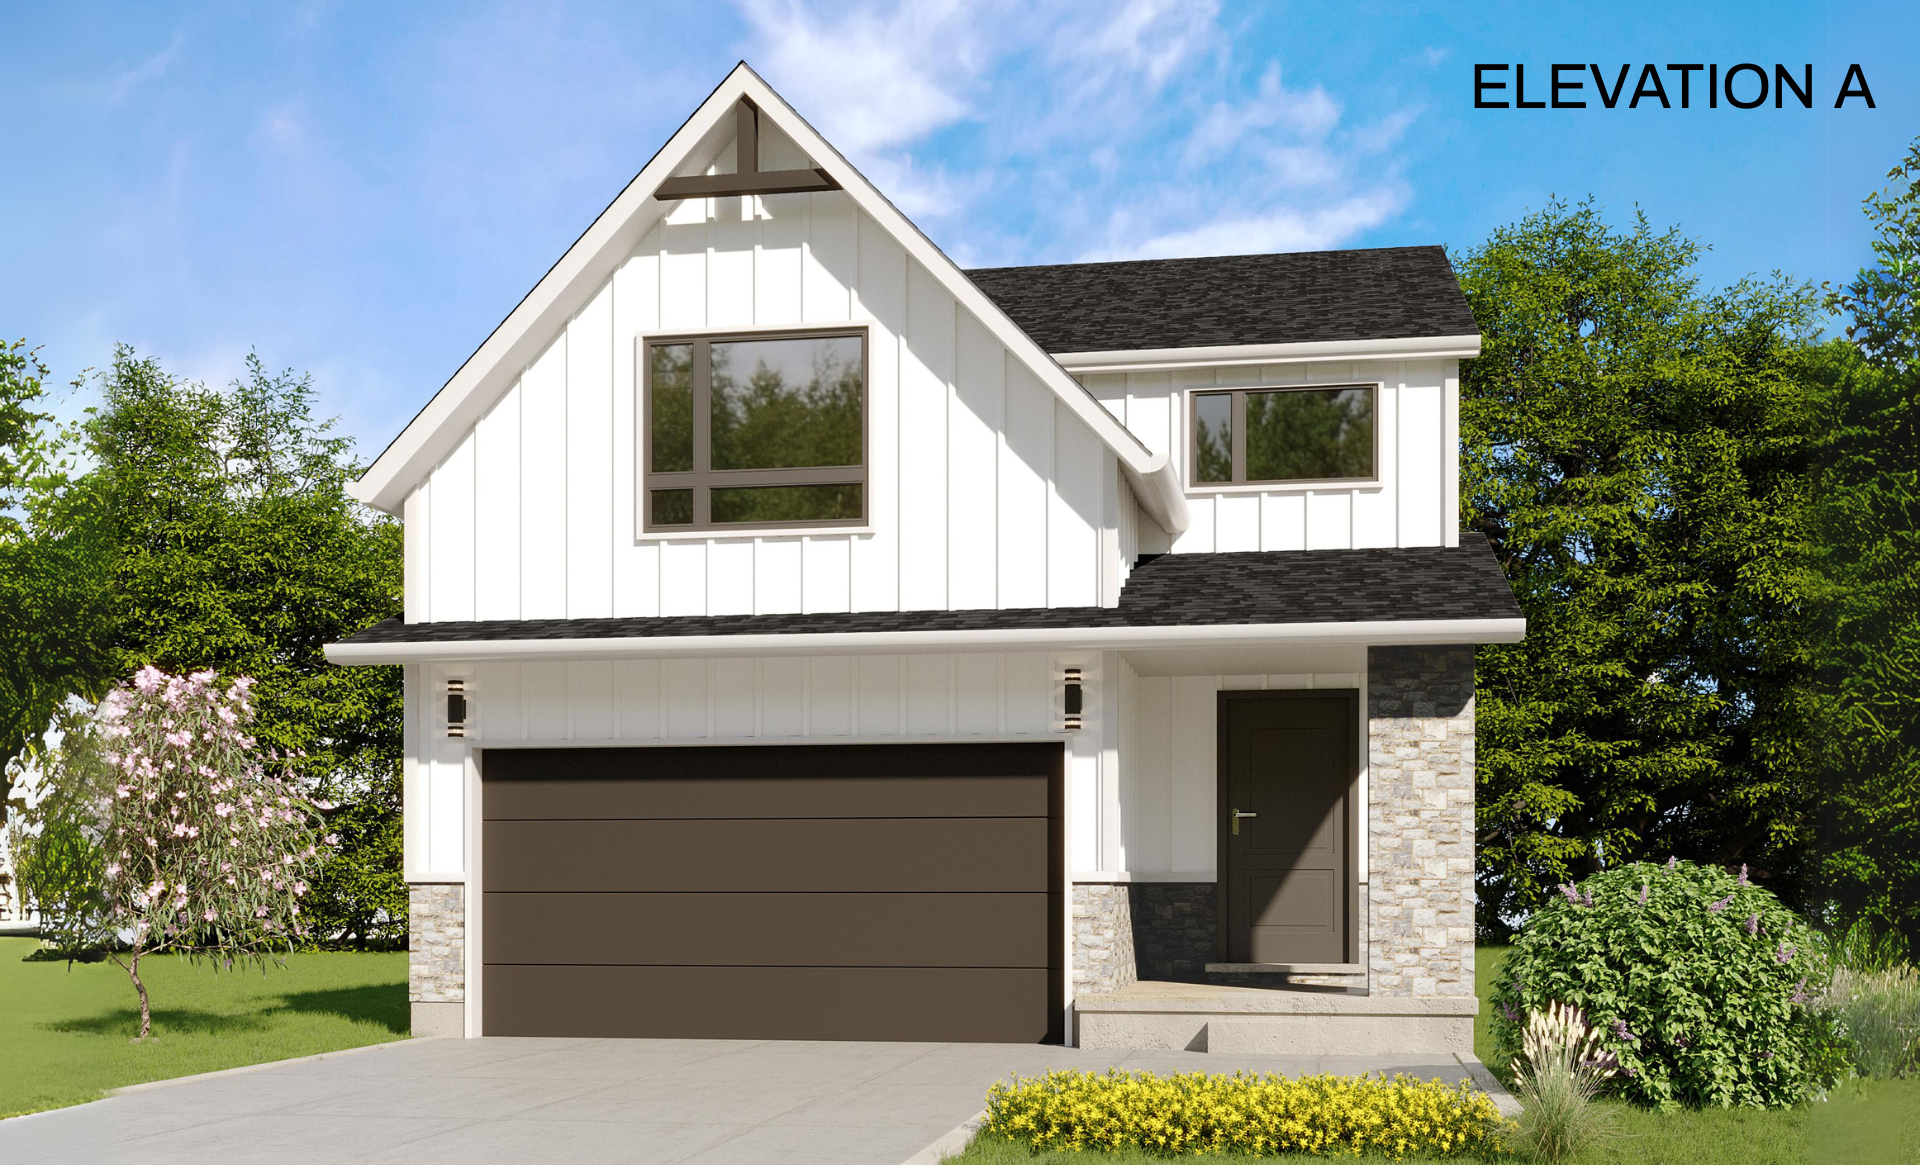 an artist 's impression of a house with a black roof and a brown garage door .